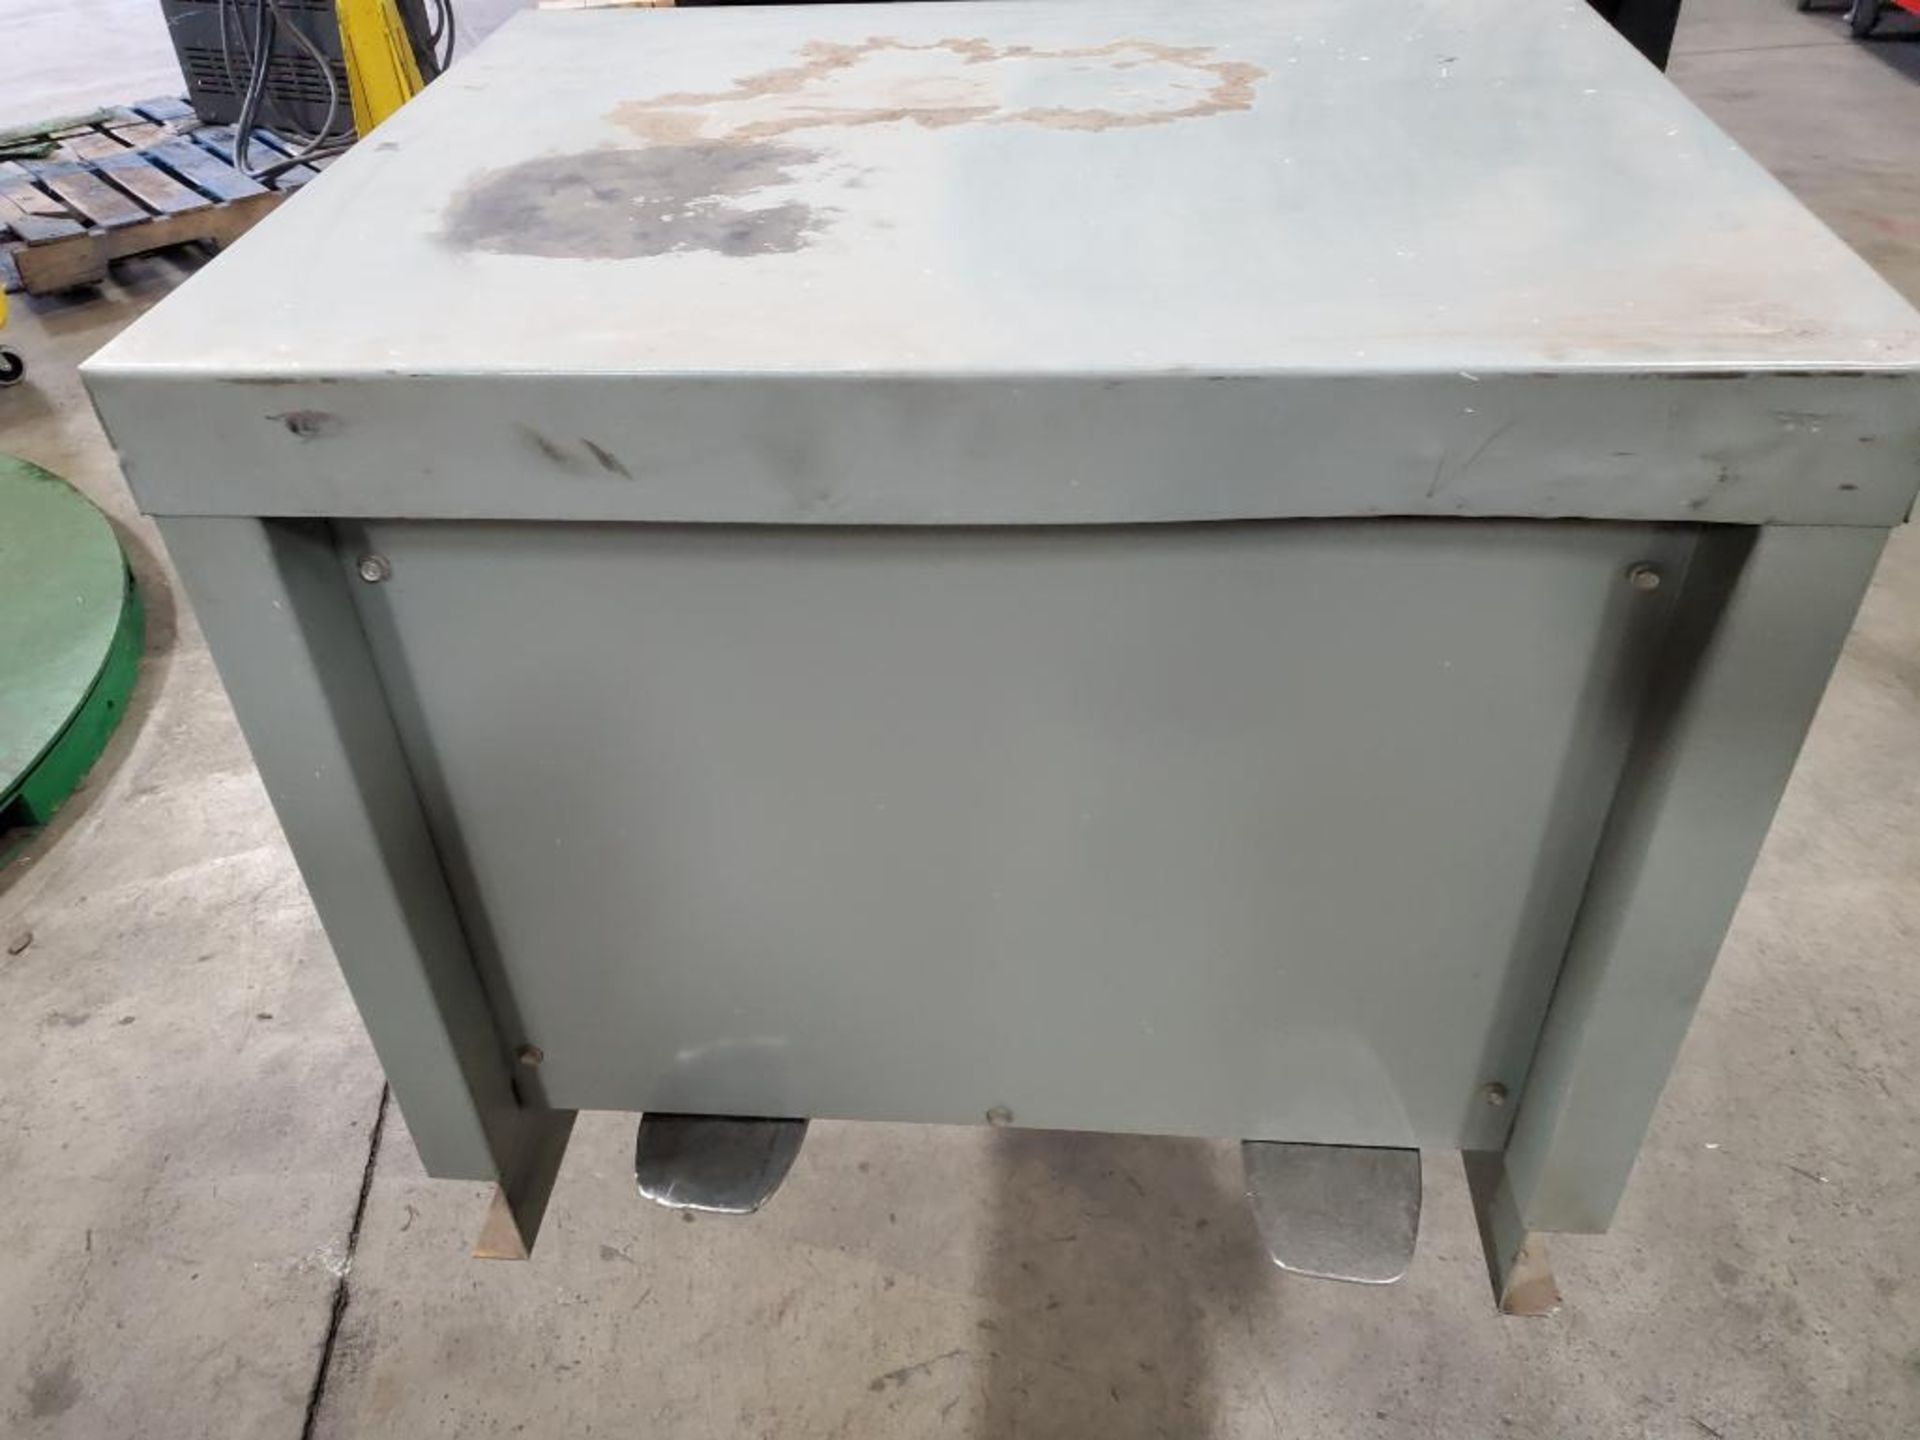 30kVa Acme Transformer. Catalog number T-1A-53312-35. Primary 480v. Secondary 208Y/120. - Image 7 of 11